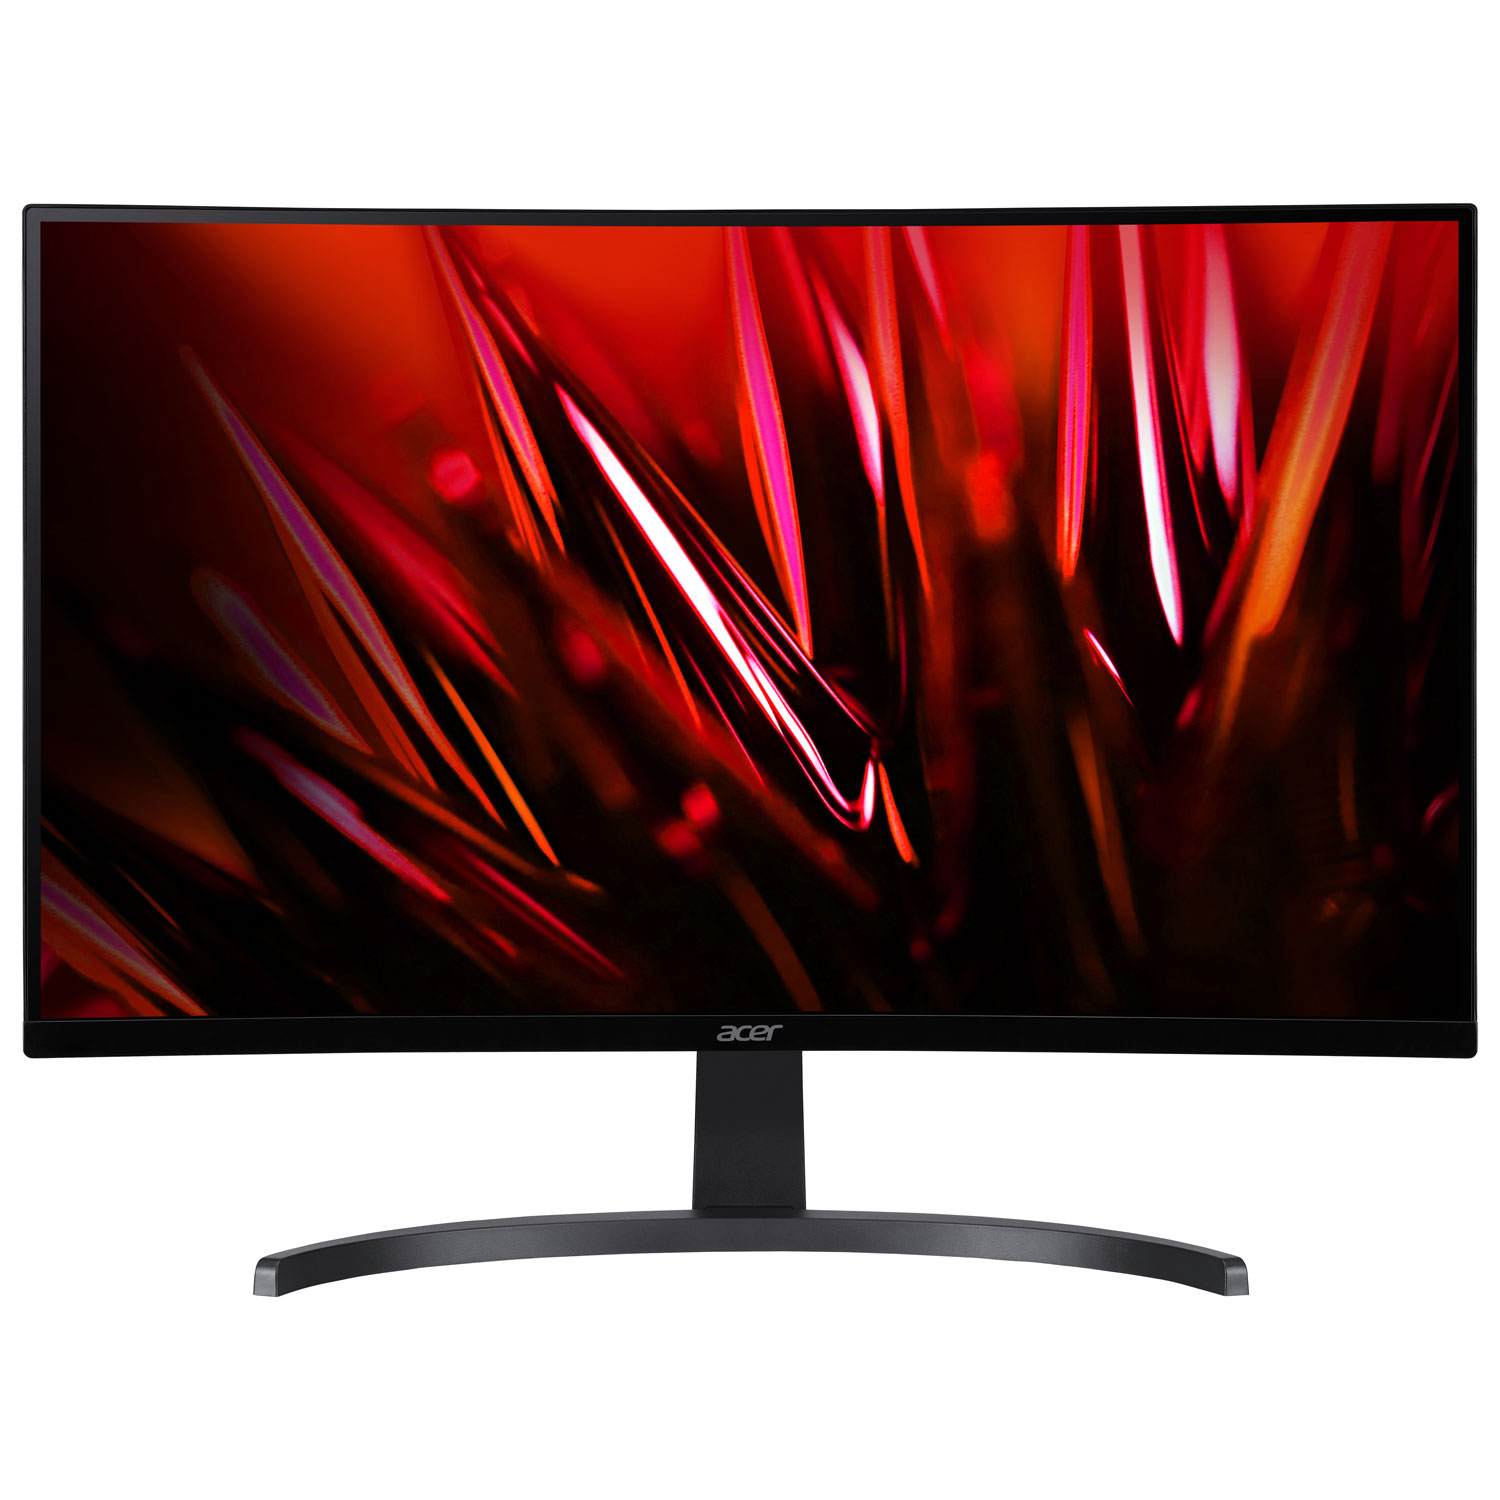 Acer 27" FHD 165Hz 1ms GTG Curved LED FreeSync Gaming Monitor (ED273 PBIIPX) - Only at Best Buy